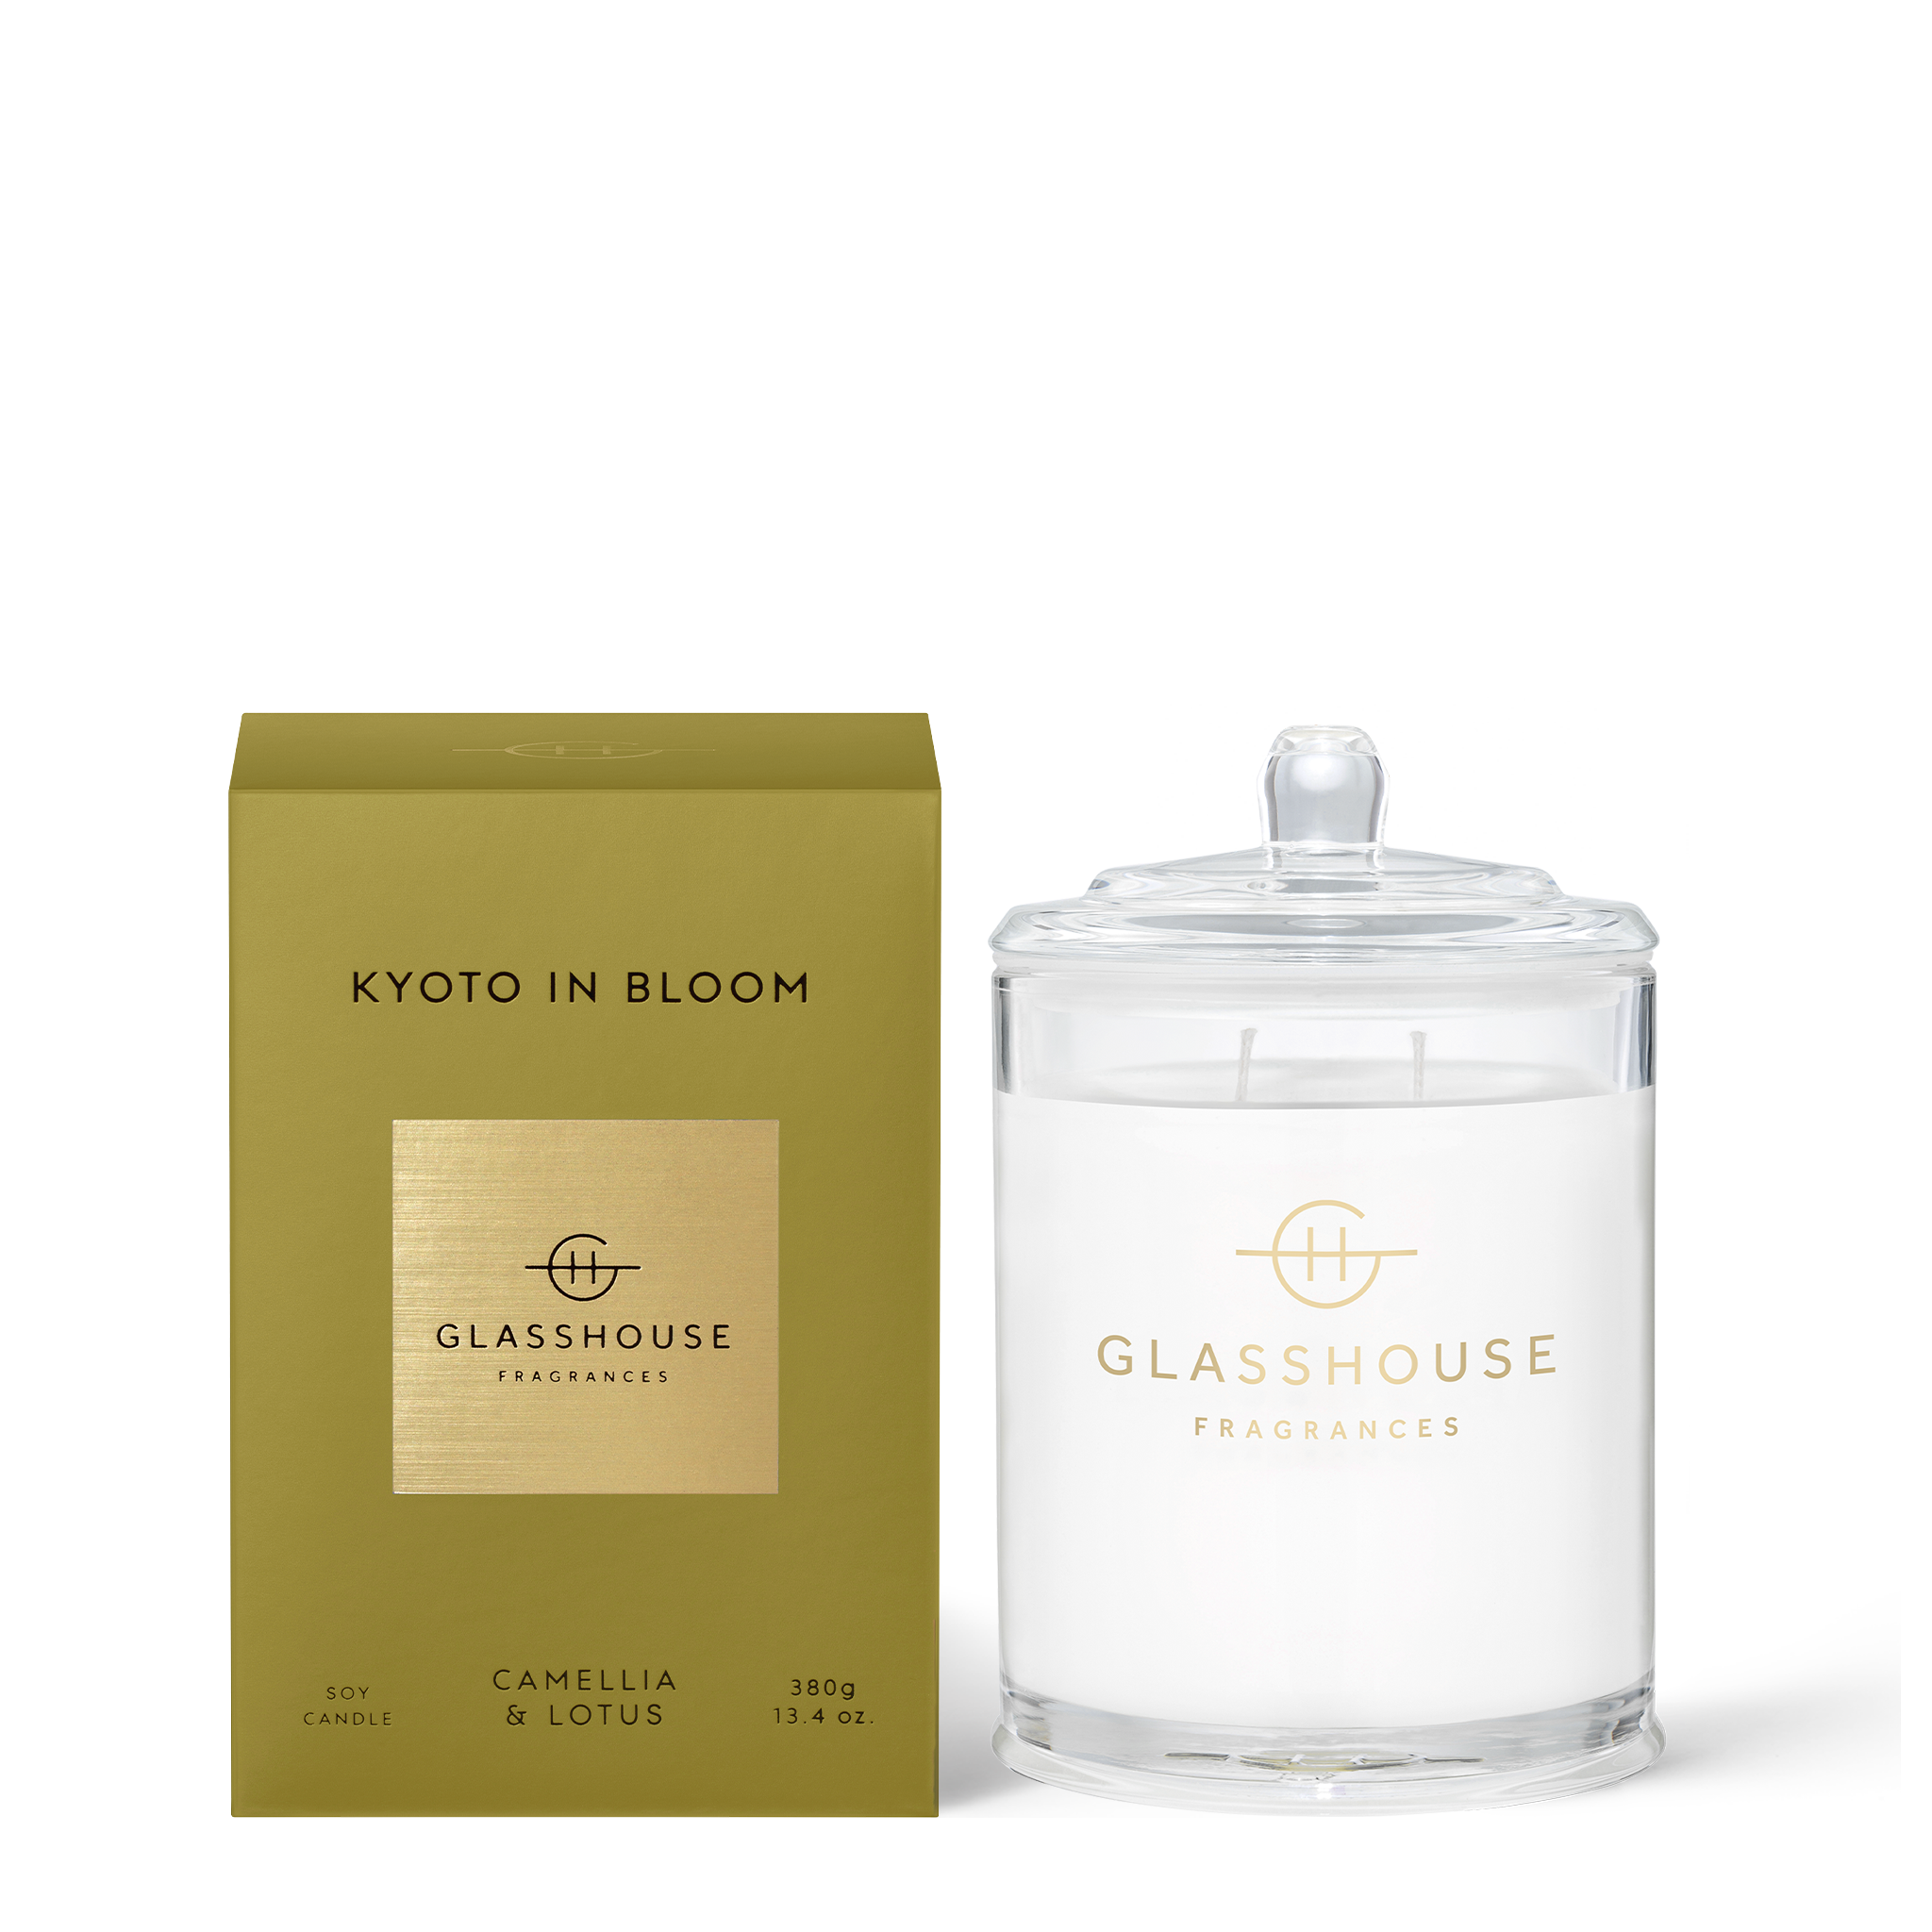 Glasshouse Fragrances 380g Soy Candle - KYOTO IN BLOOM - Camellia & Lotus